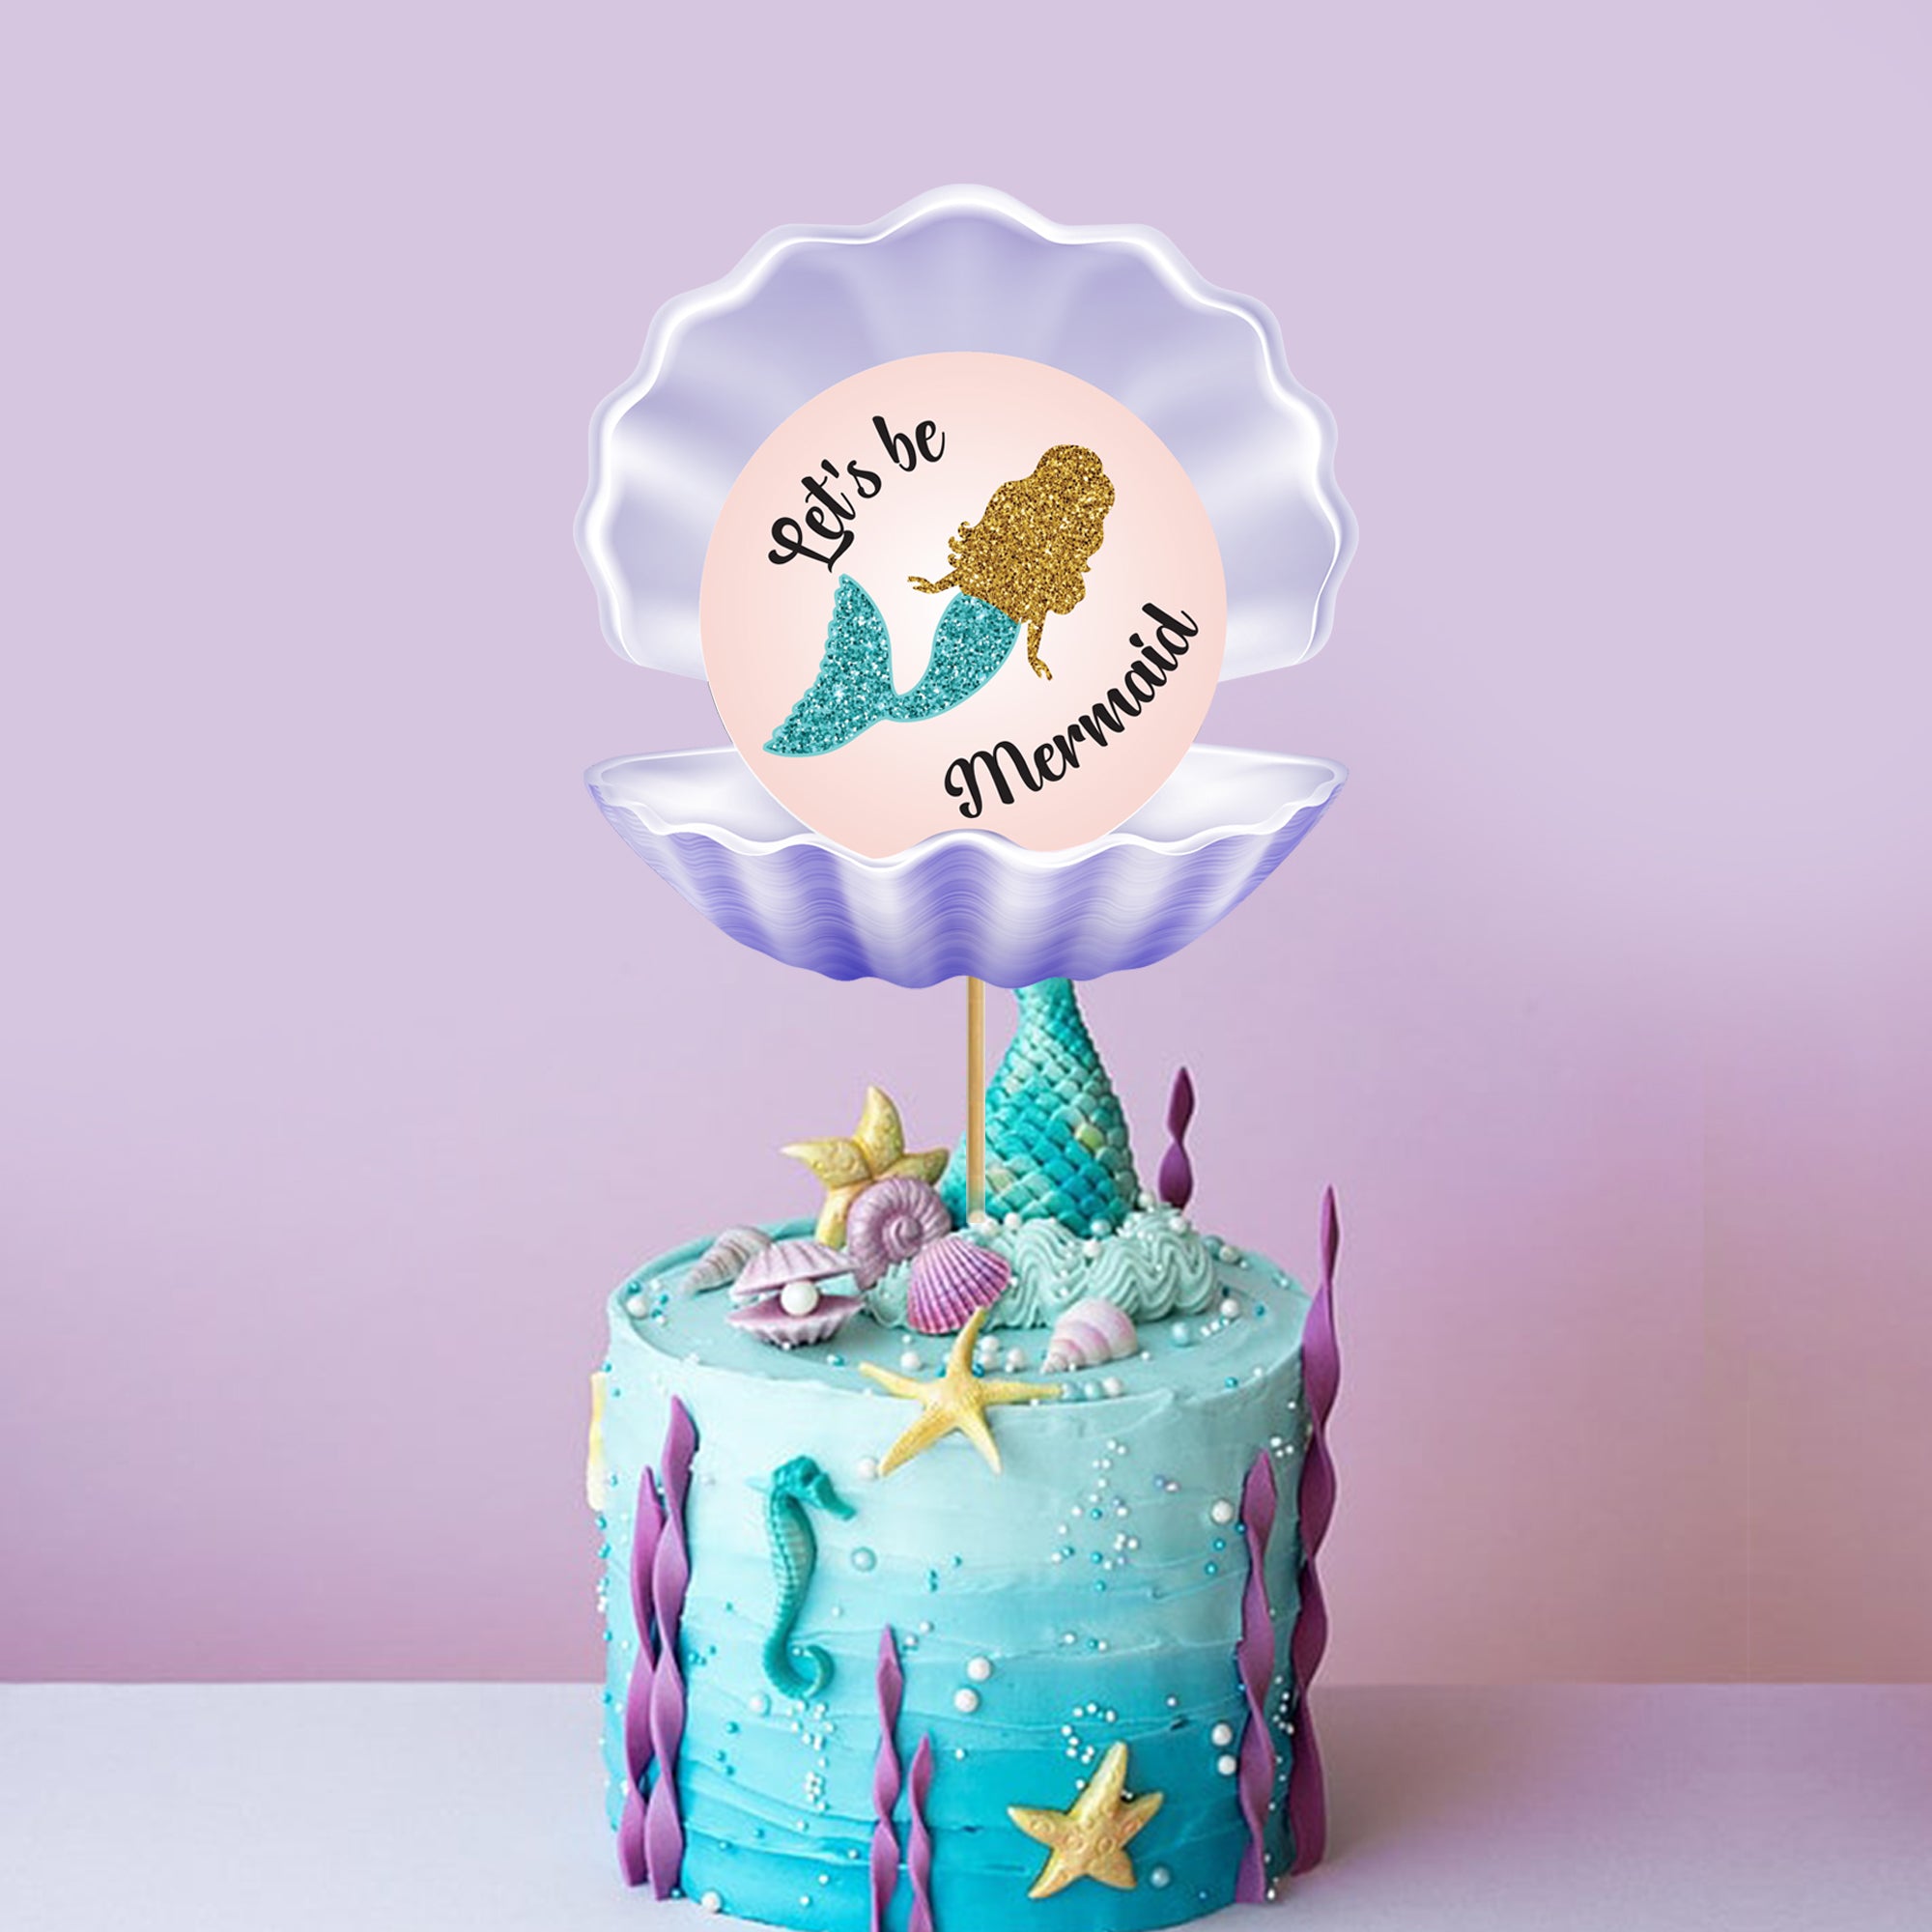 Little Mermaid Cake Design - How to Make | Decorated Treats